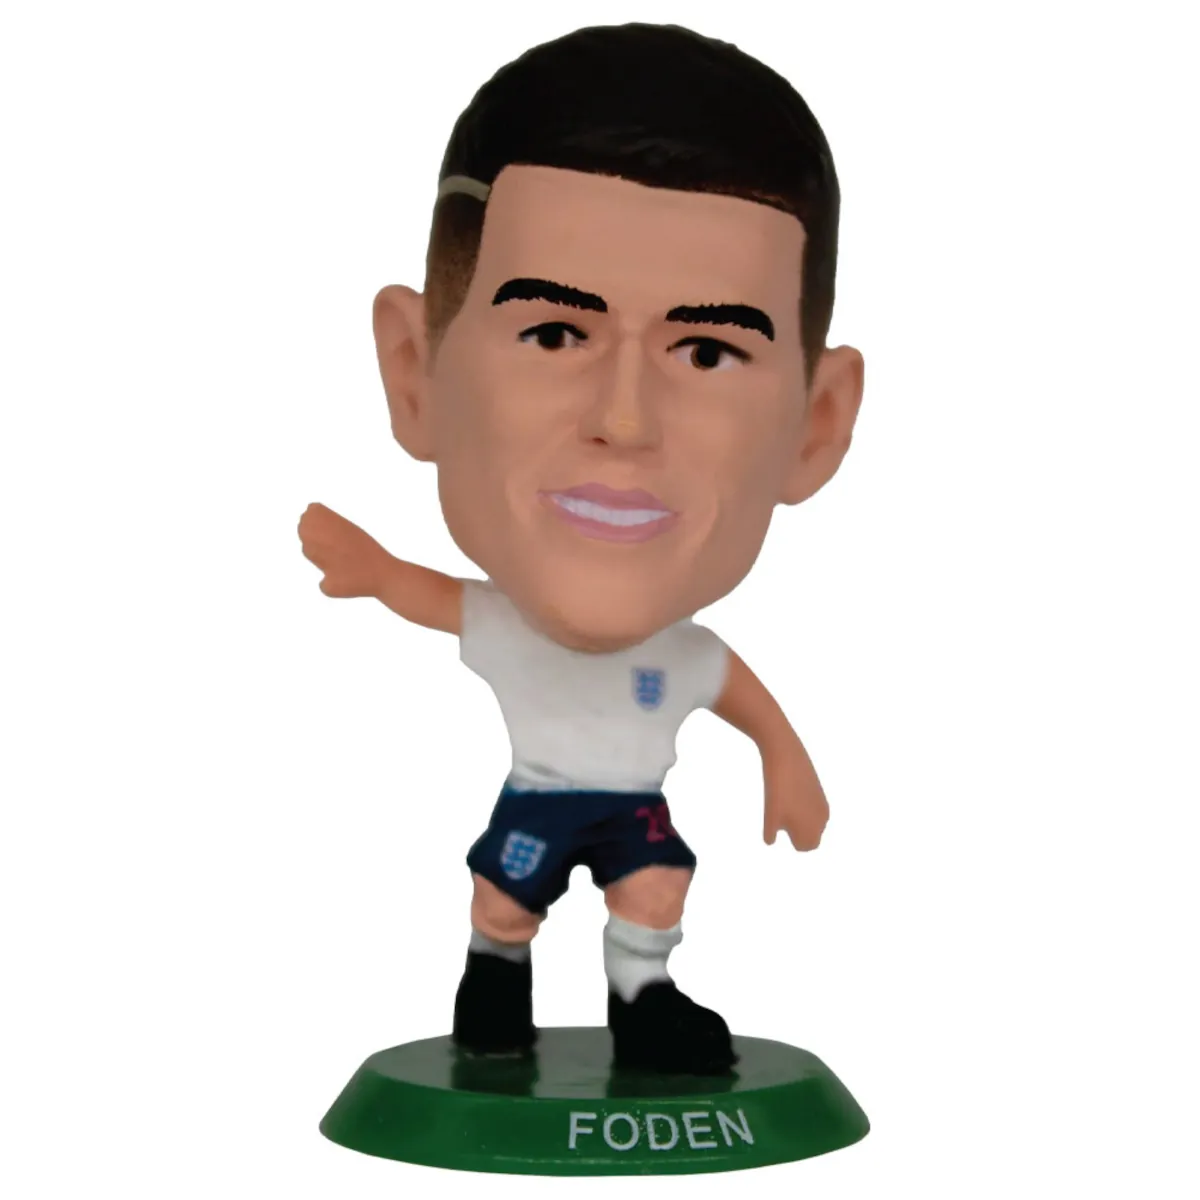 TM-05223 England F.A. SoccerStarz Collectable Figure - Phil Foden